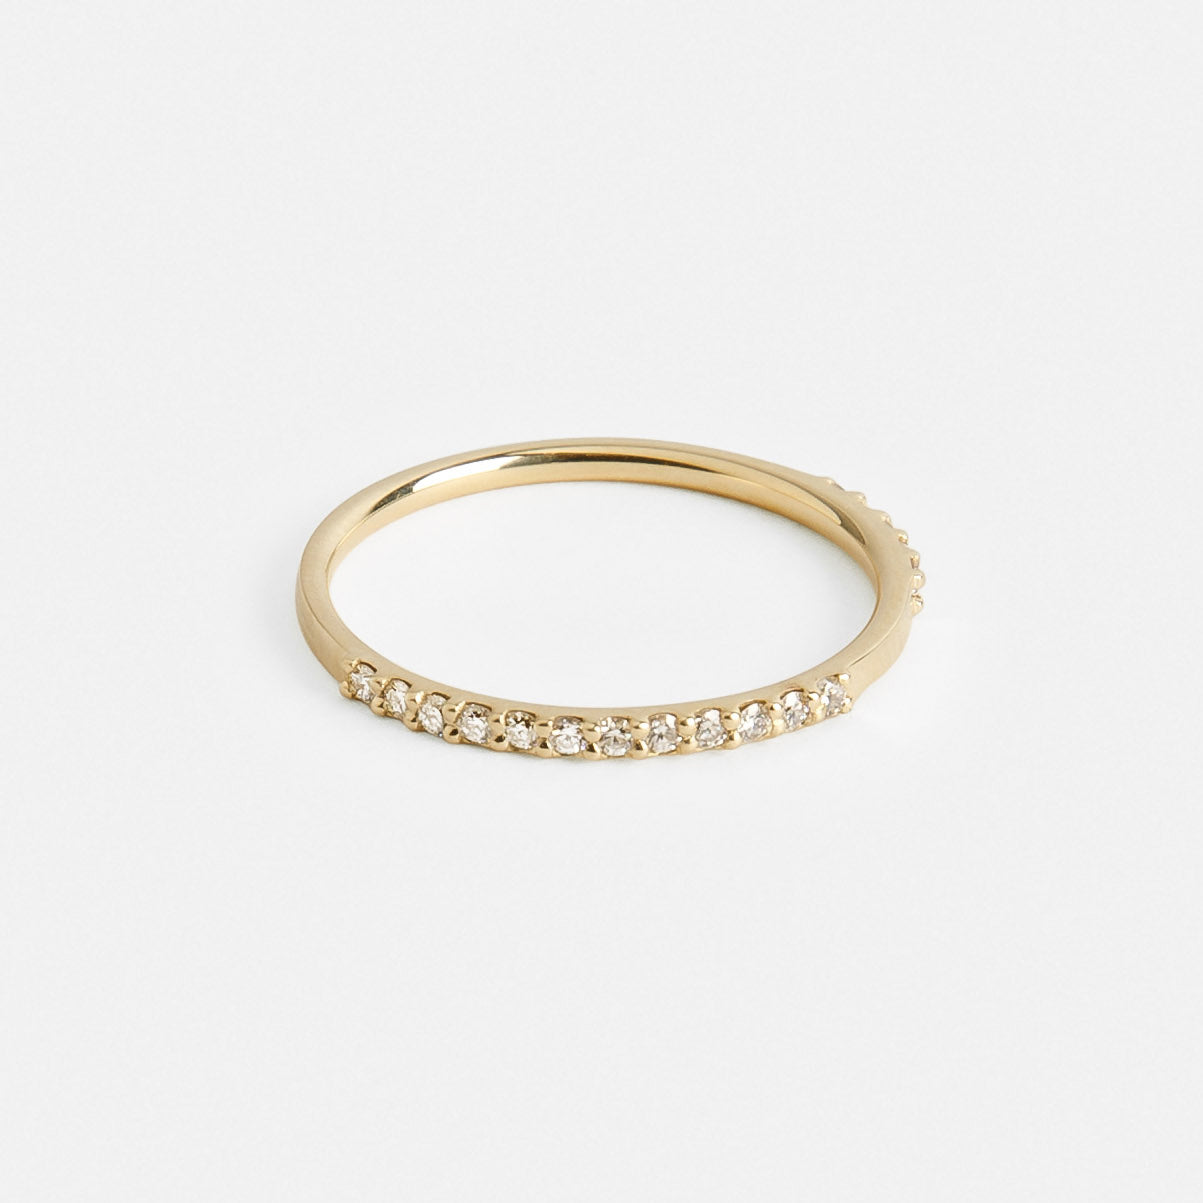 Row Delicate Ring in 14k Gold set with White Diamonds By SHW Fine Jewelry NYC